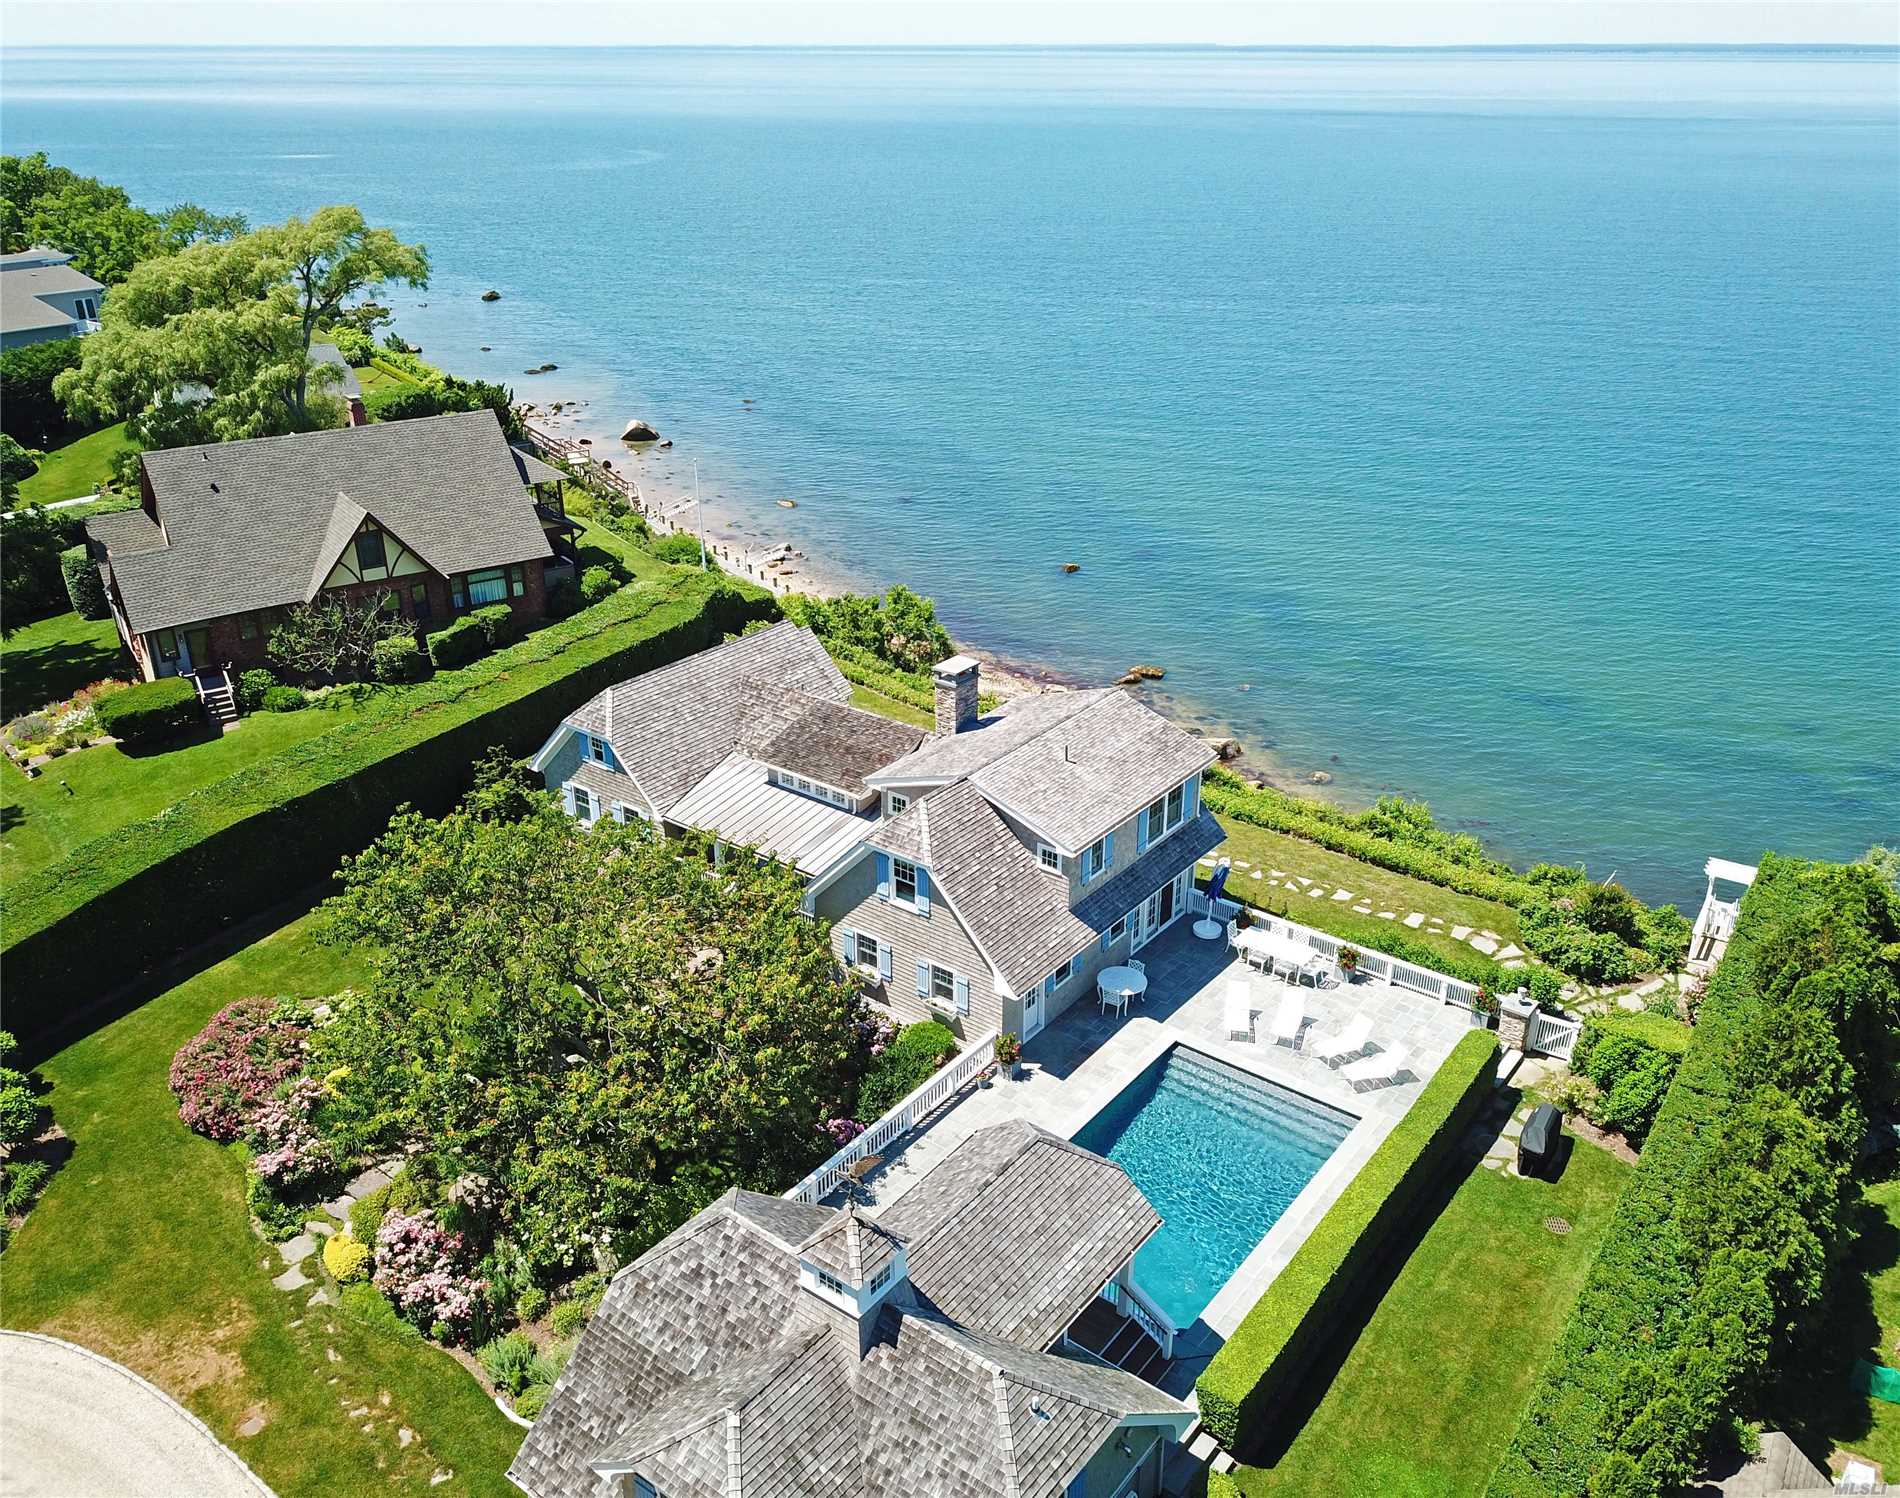 Simply Exquisite Pristine Nantucket Style Waterfront Compound Adorns Bluffs Sitting High Above Li Sound. The Chic Main House With Gourmet Kitchen And Double Sided Fireplace And Separate Pool House Are Built Around The Common Outdoor Recreational Areas, Gunite Heated Pool,  Blue Stone Patio, , Bar-B-Que, And Staircase Leading To 148 Of Beachfront.